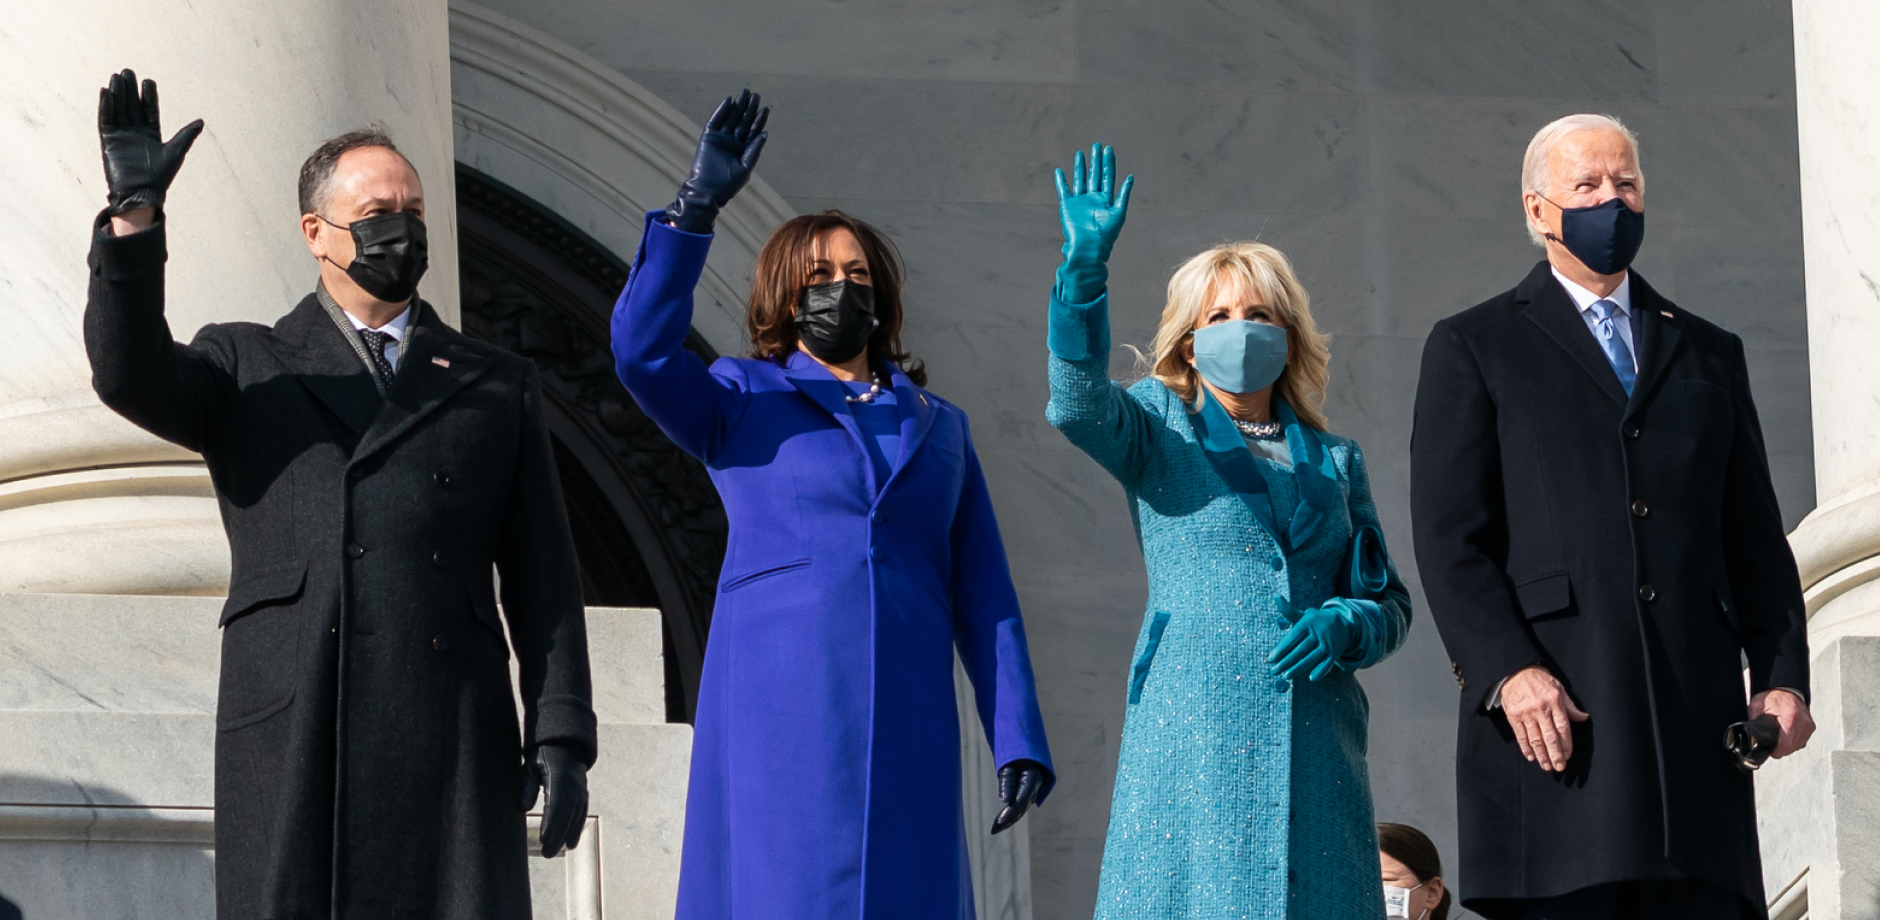 Left to Right: Dough Emhoff, Vice President Harris, Jill Biden, and President Biden. Waving on Inauguration Day